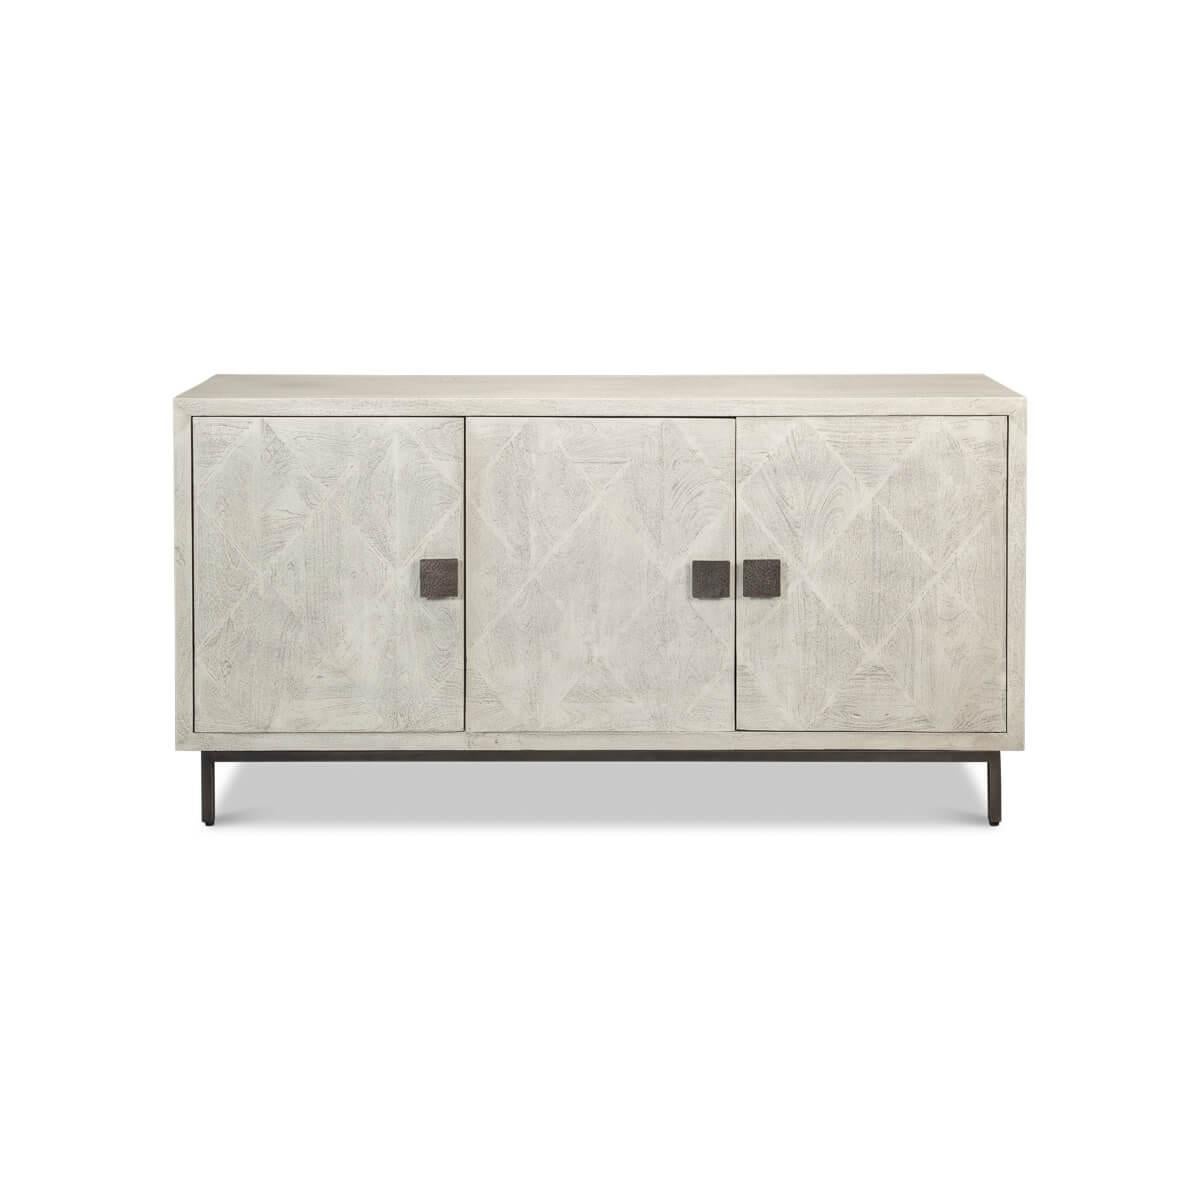 This striking piece features a light gray wash finish, giving it a refreshing and contemporary look that's right on-trend. The front panels are adorned with a subtle diamond pattern, offering a textured touch that's visually intriguing and